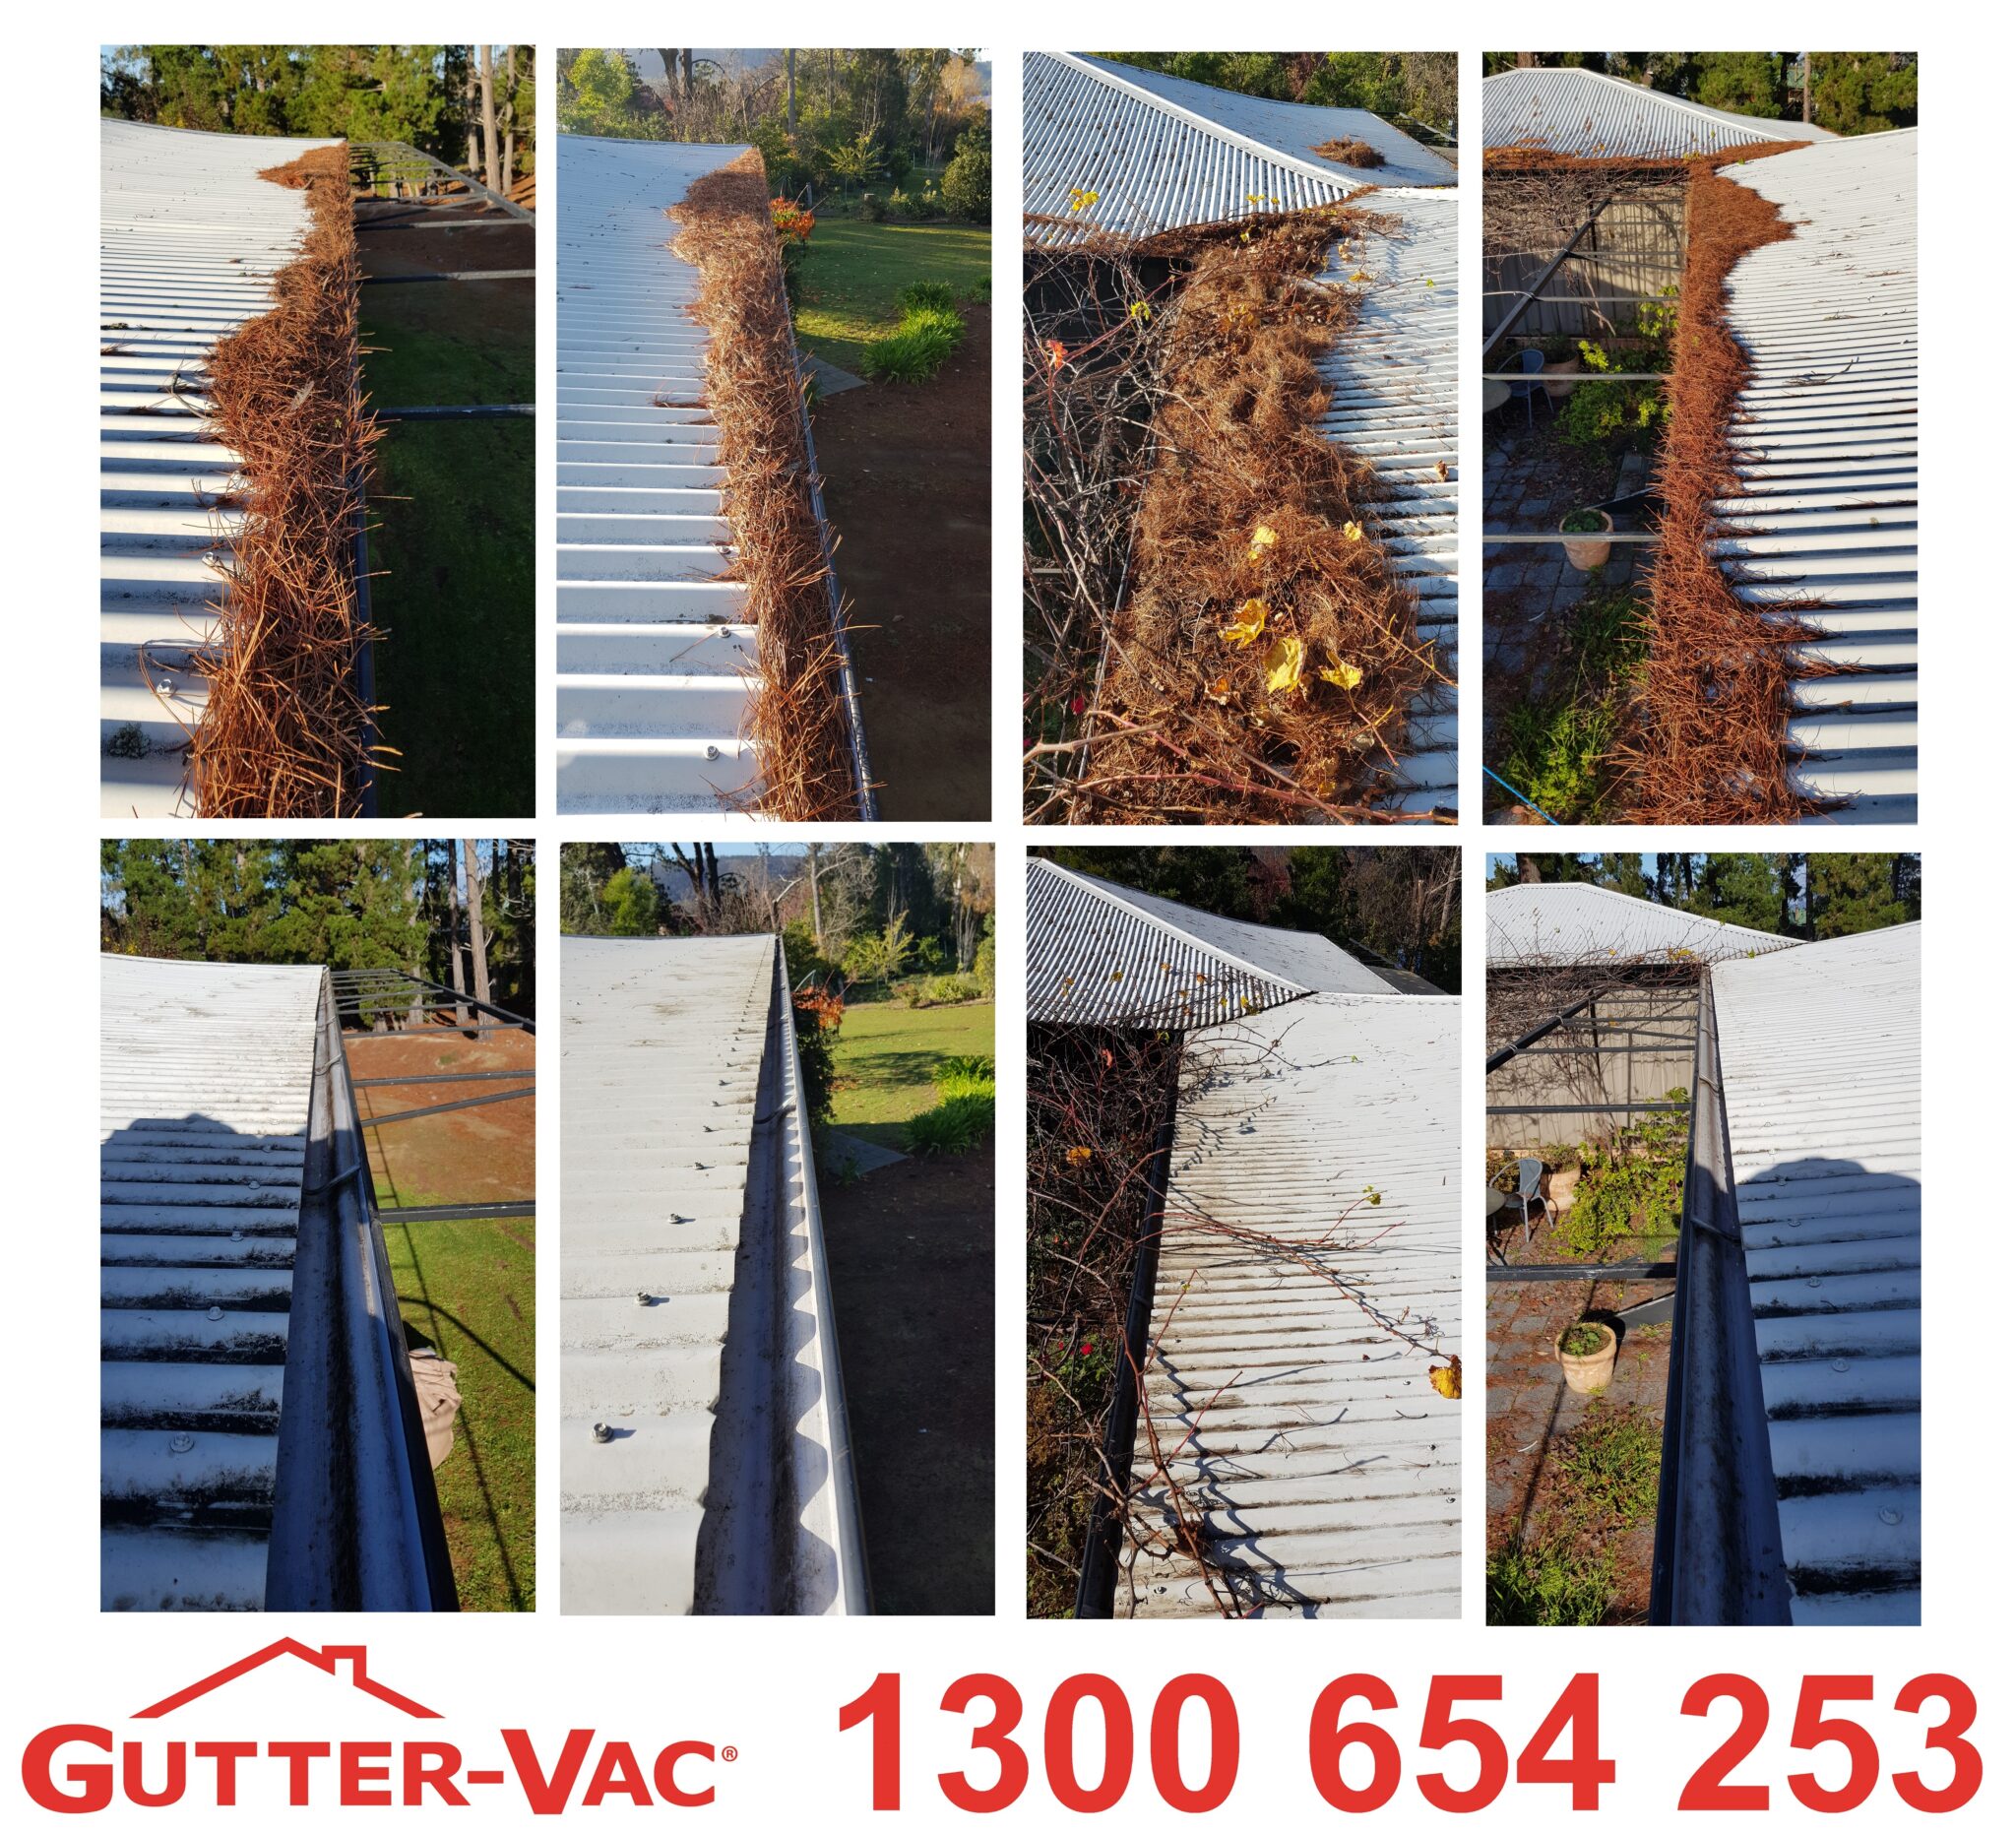 Got Issues With Pine Trees and Need Gutter Cleaning